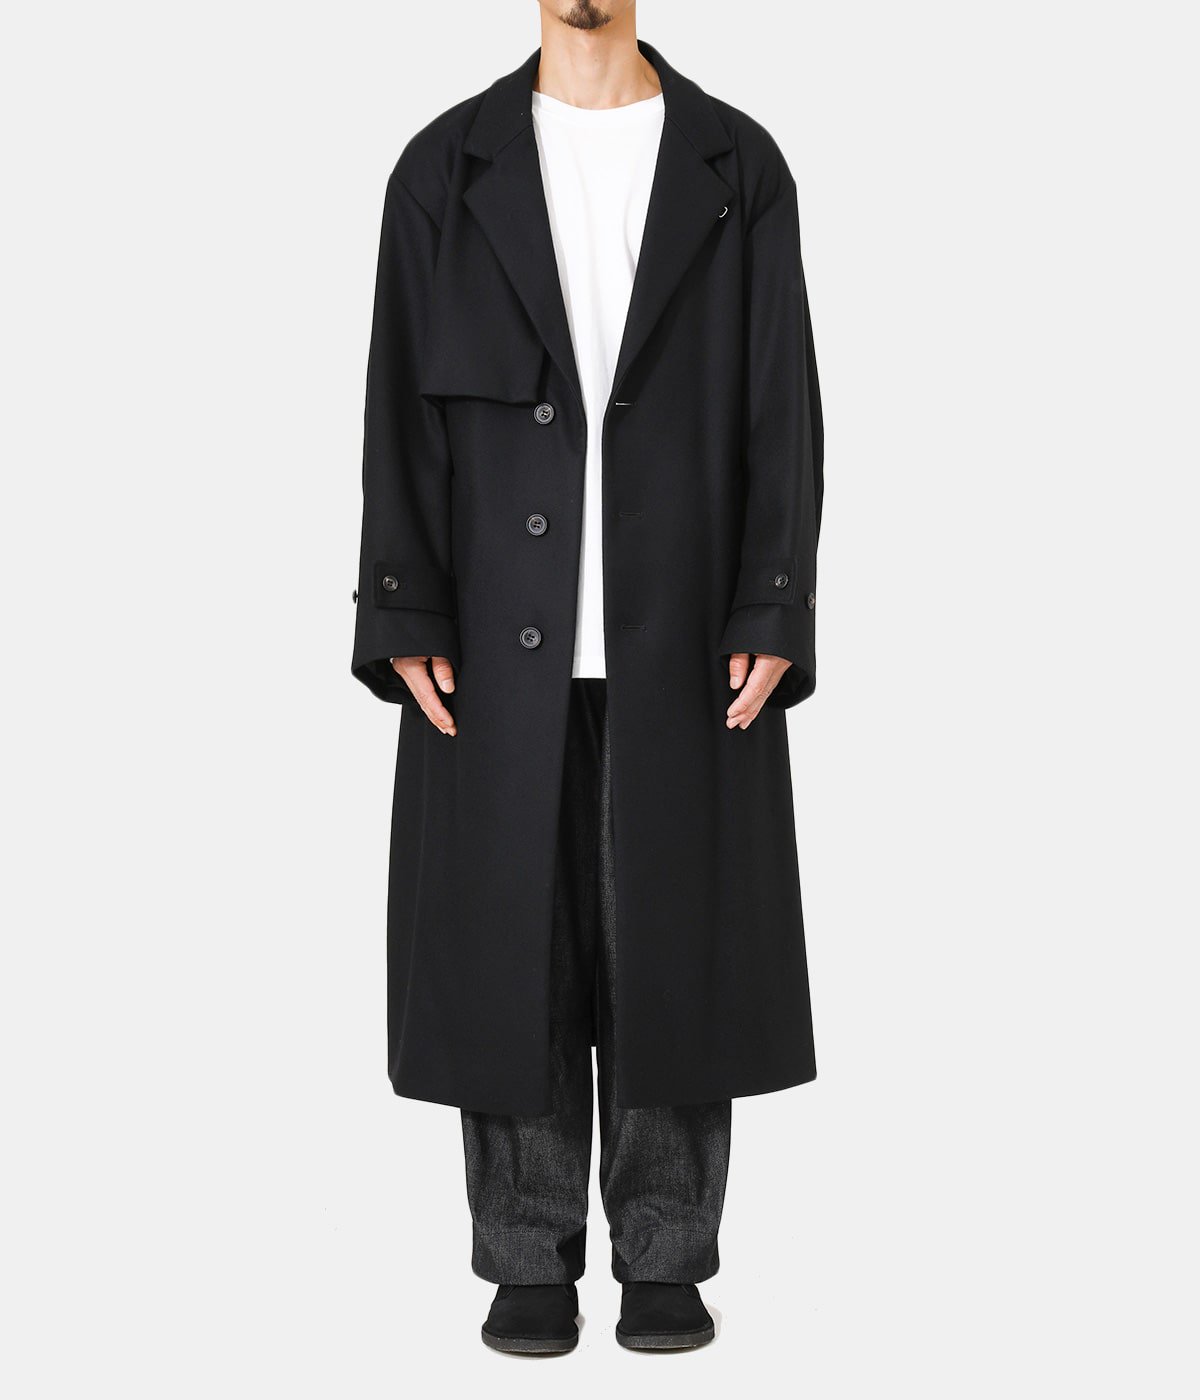 Stein lay Chester coat | angeloawards.com